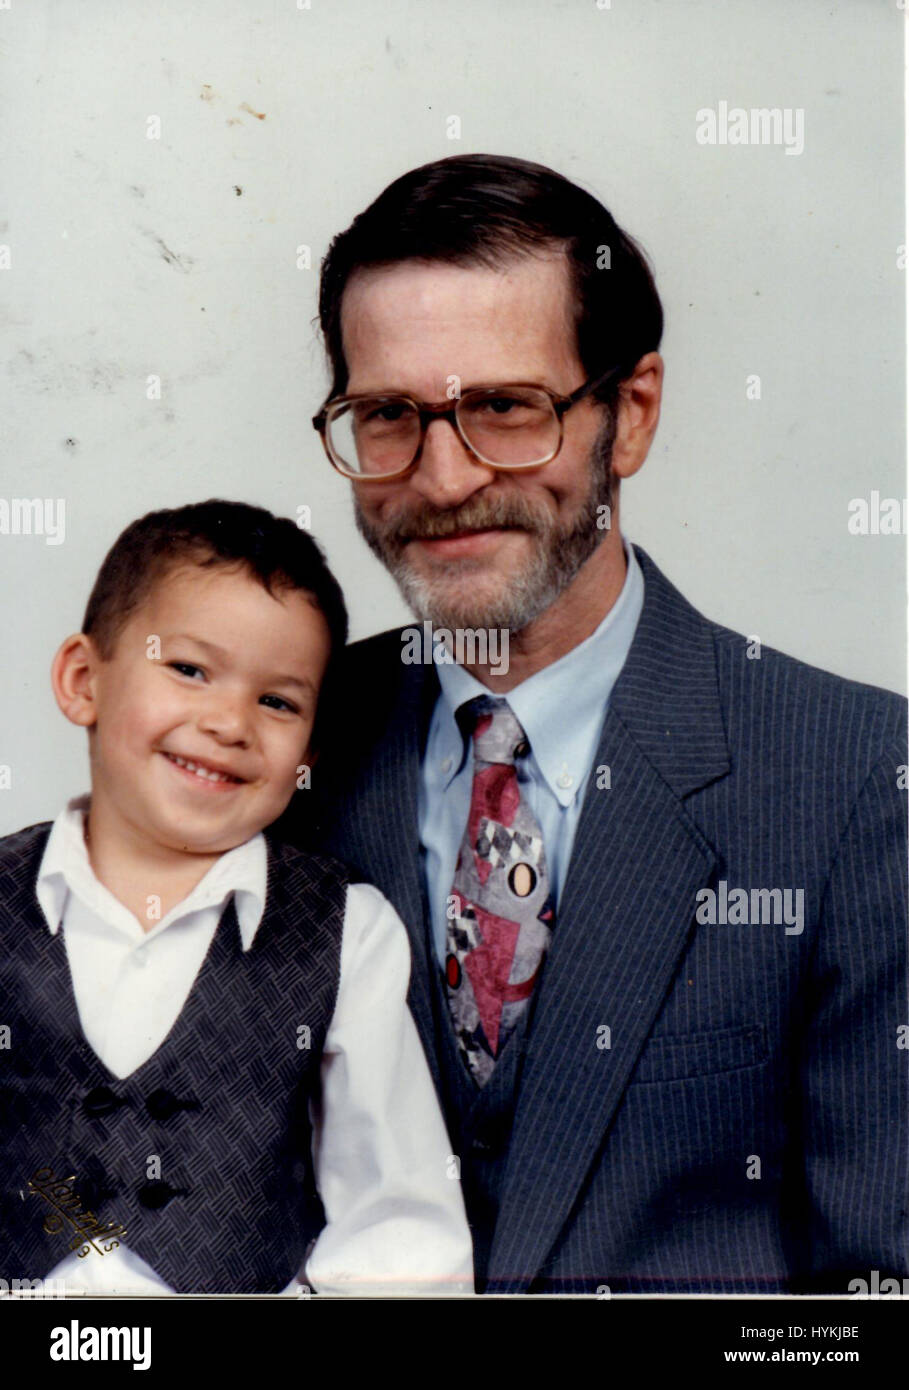 Houston, Texas, USA: A picture of Tiamat's late partner Mark Phillips and son Marcos Hernandez as a child, pictured in June 2002. WELCOME to the world of the transgender former banker who claims to be the first and only person to have both ears cosmetically removed as part of her quest to become a DRAGON.  Born Richard Hernandez in Mobiltown, Maricopa County, Arizona, this fifty-five-year-old would-be dragon now known as “Tiamat” has taken on several personas and undergone multiple stages of transformations or ‘metamorphosis’ to arrive at her final reptilian destination. This “human-dragon” al Stock Photo